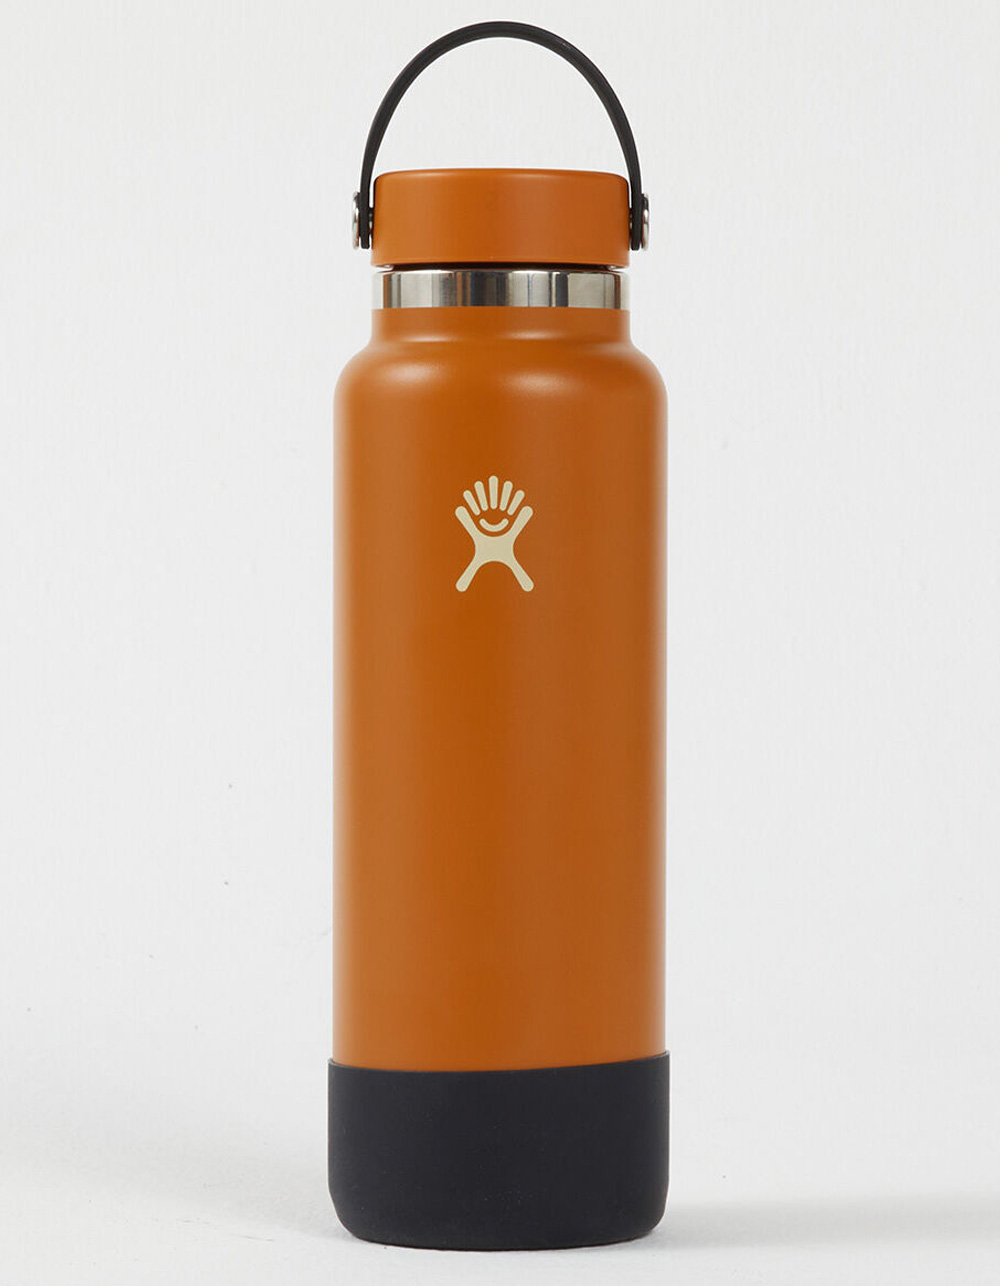 40 oz Hydroflask - general for sale - by owner - craigslist